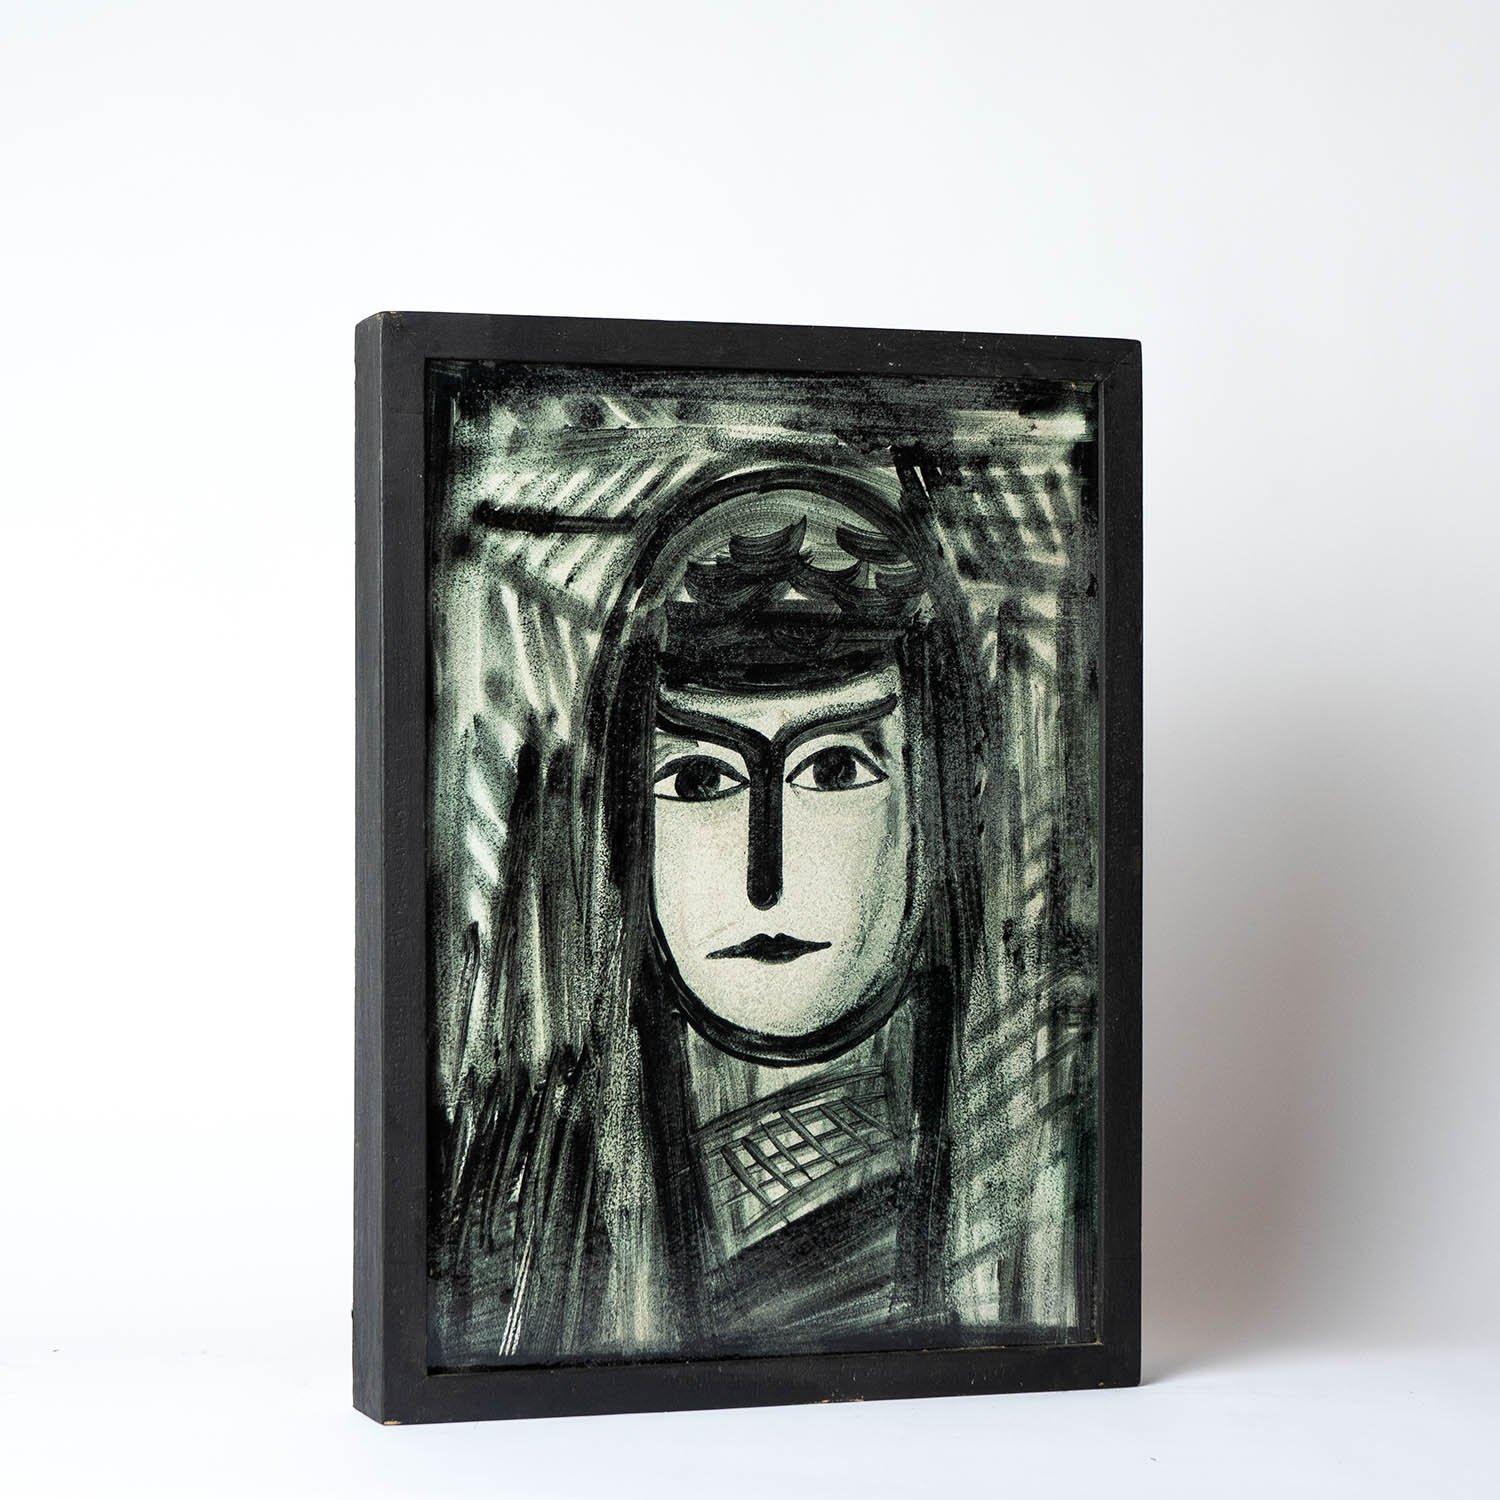 Vintage Monochrome Portrait Painting

Dating from the 1950s-1960s period and painted in the Fauvist style.

Freely and quickly painted confidently with monochrome glaze on thick ceramic tile.

They are unsigned but definitely by an accomplished